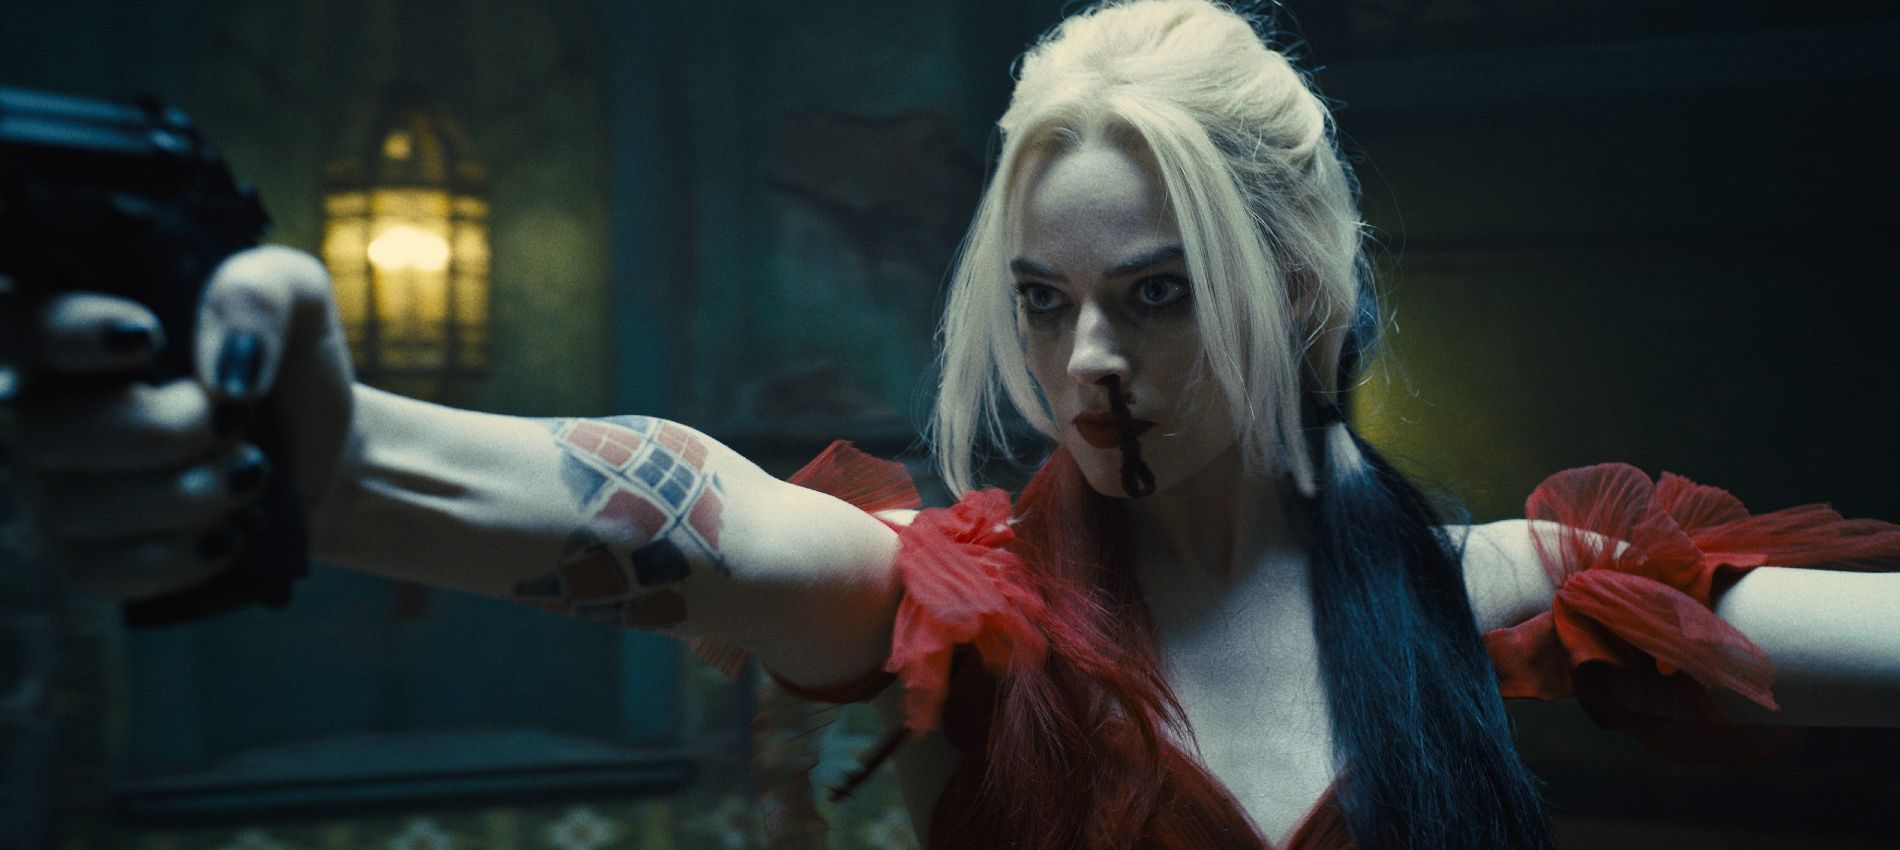 Harley Quinn dual wielding pistols in James Gunn's The Suicide Squad